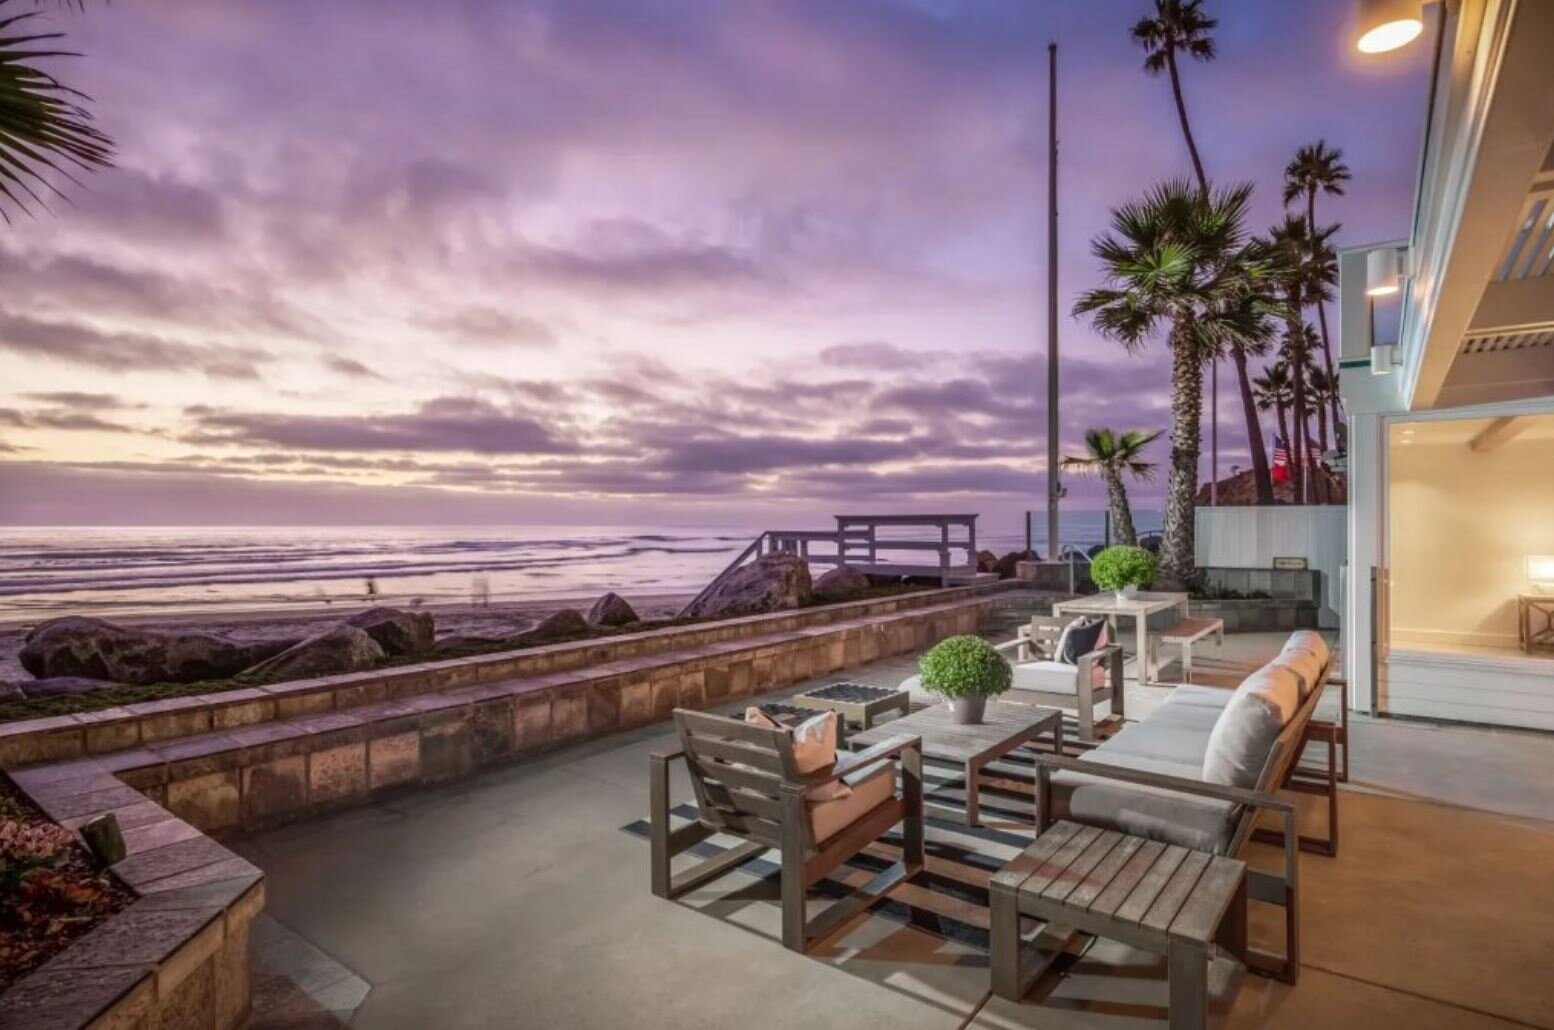 The waterfront California home of Sharon Alesia, the late horse breeder and wife of actor and director Frank Alesia, hit the market Friday for $23 million. Pacific Sothebys International Realty.California Beach House With Direct Access to the Water